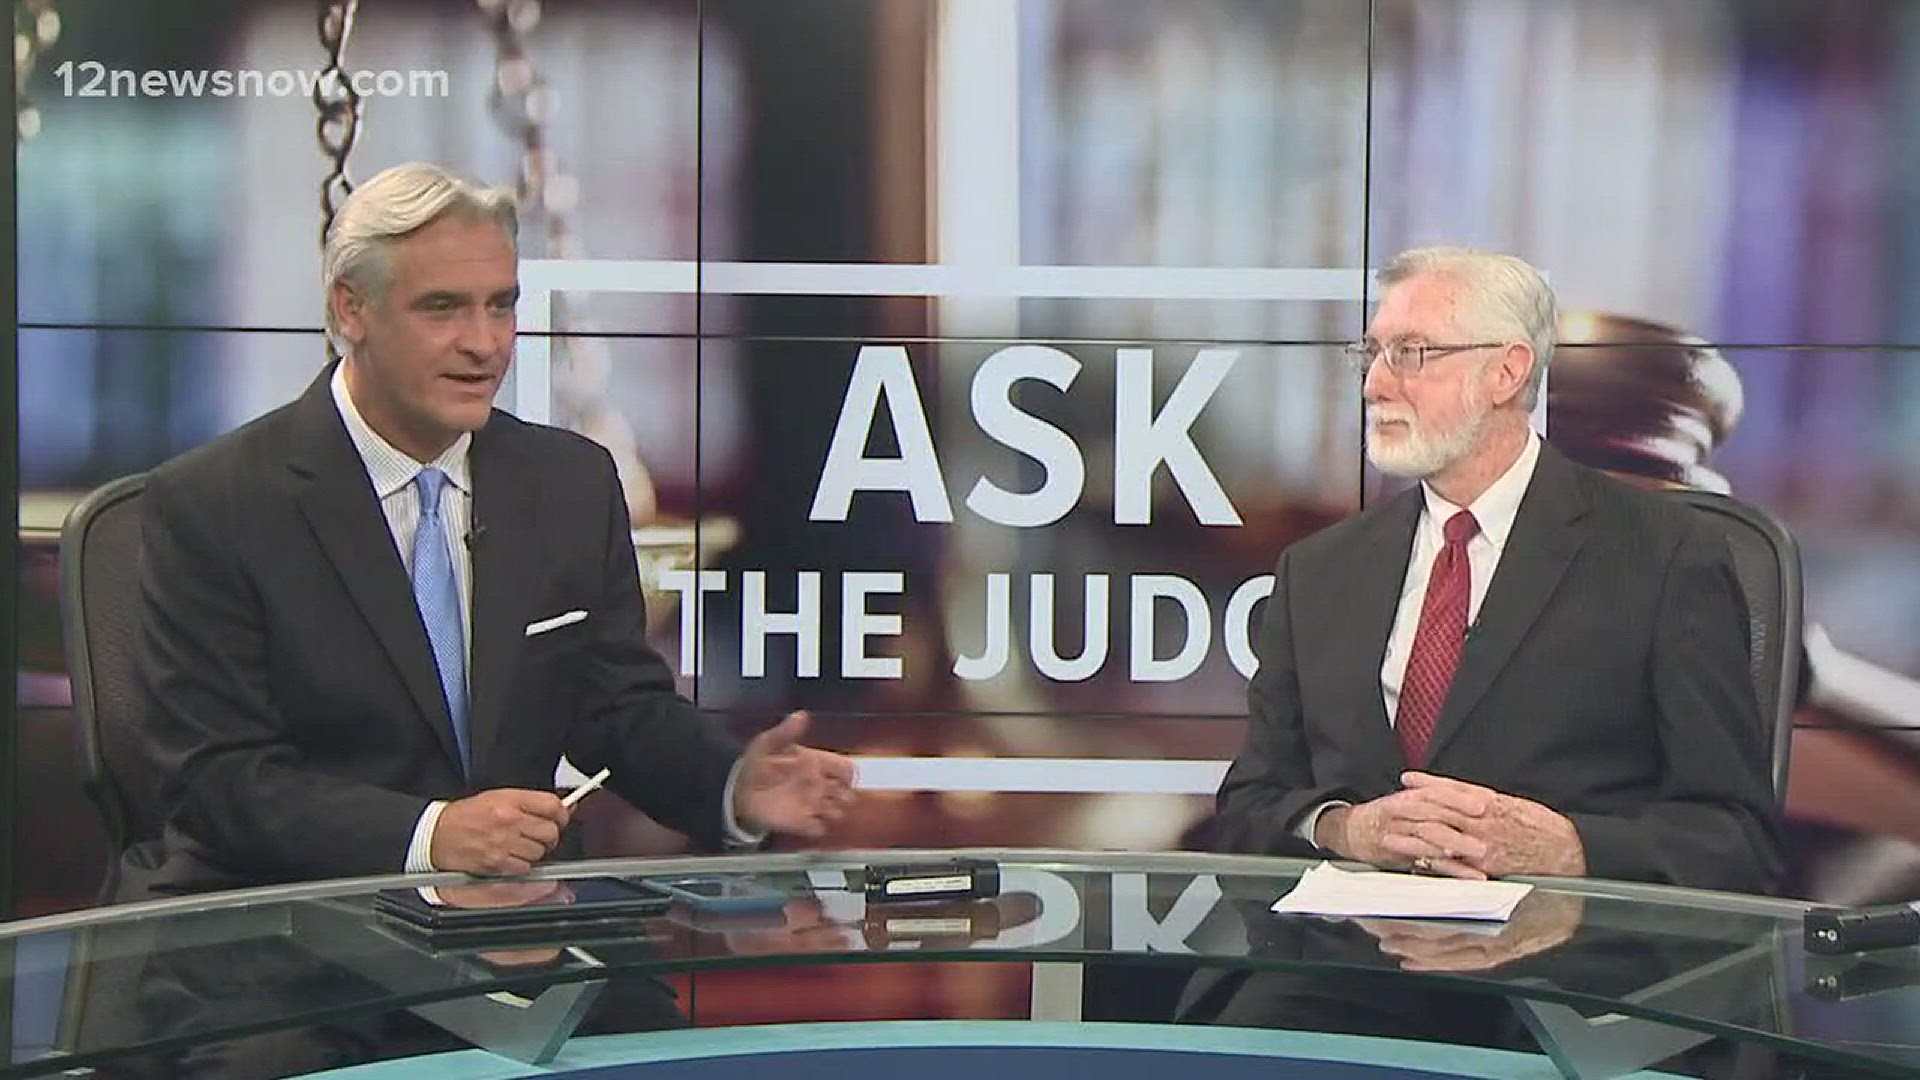 Today on Ask the Judge, a landlord asks about property left behind and more viewer questions.